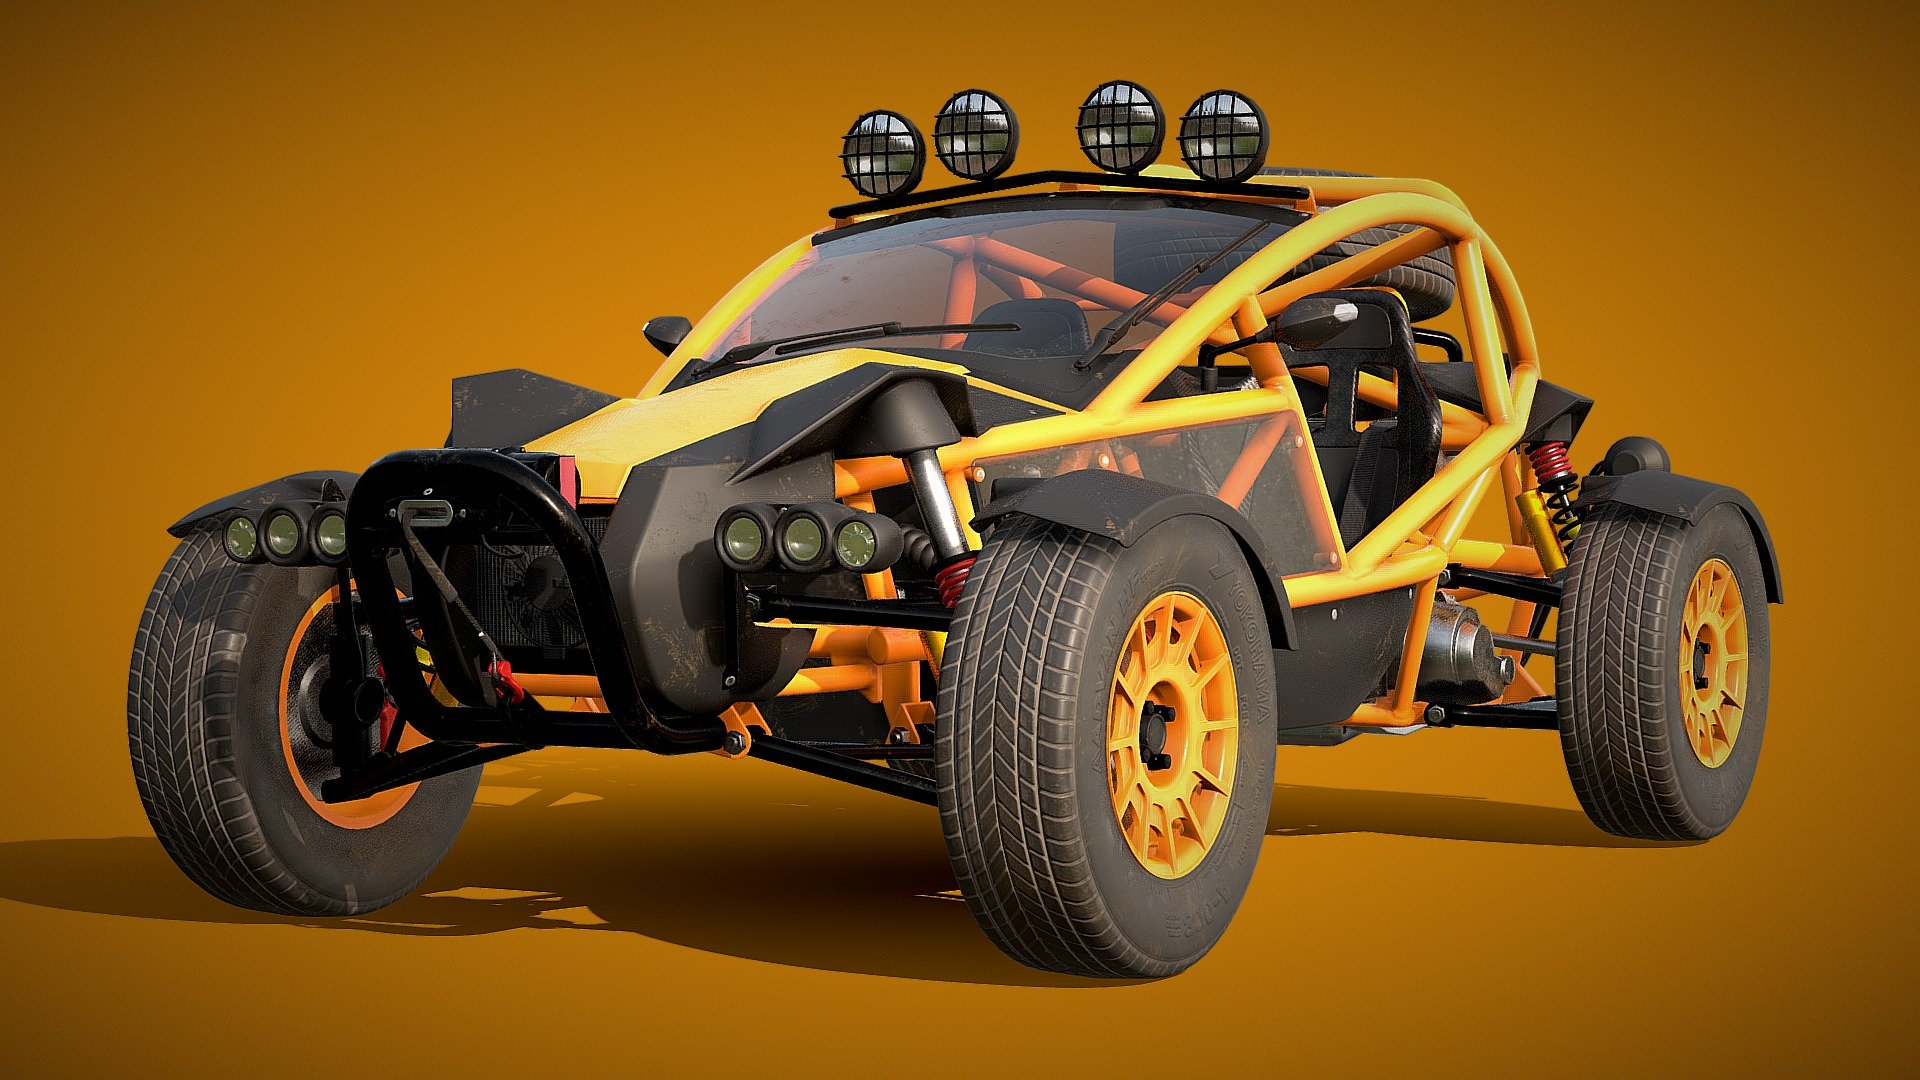 Ariel Nomad Buggy car
This model is ready for game so it has 87k polys and two layout of textures, one for exterior this one with a resolution of 4096x4096 and the other for objects with transparency, this last one with a resolution of 1024x1024
With this set of textures the model has a texel density of 625 pixel per square meter, so in case you need it both set of textures can be easily reduced and the final result will still be fine, 
all animatebale part of the model has propper pivot and name so it can be easily rig, exported and setup un UE4, Unity3d or CryEngine,
As the model was made following the most realistic style it can also be use for rendering in the Film industry so it can be rendered in any based in physic engine like Vray, Corona, Eve, Cycles, ect 3d model